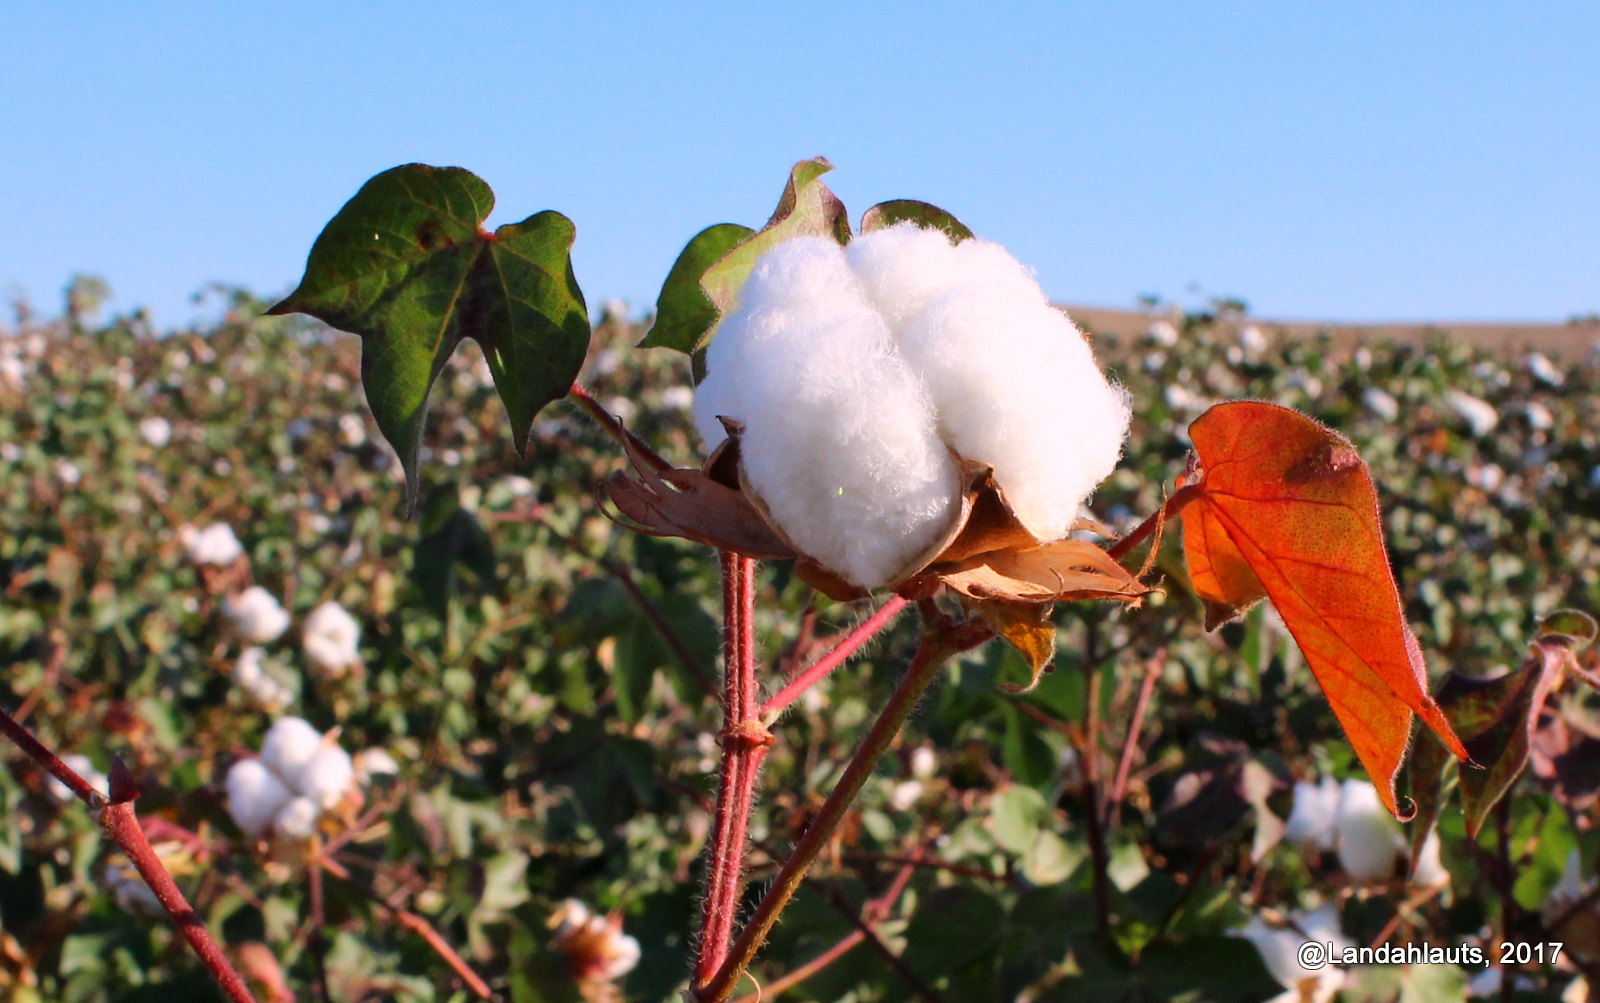 Cotton field in Andalucia, Spain